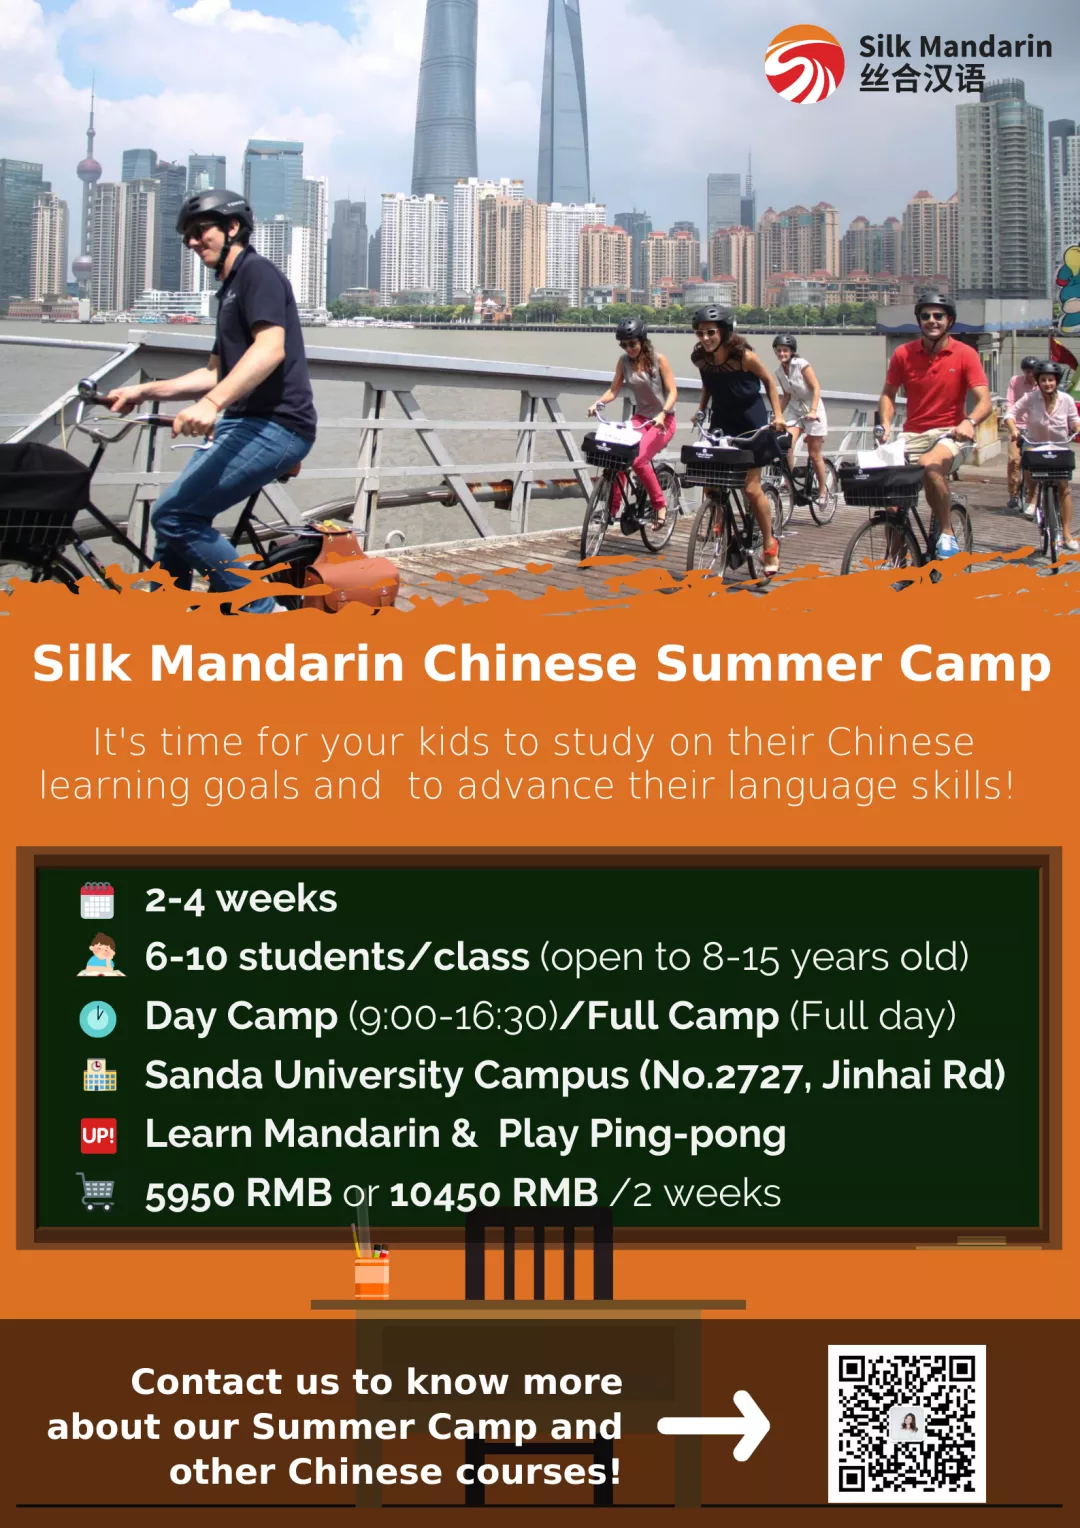 Learn Chinese and Play Ping-Pong in Silk Mandarin's Summer Camp!